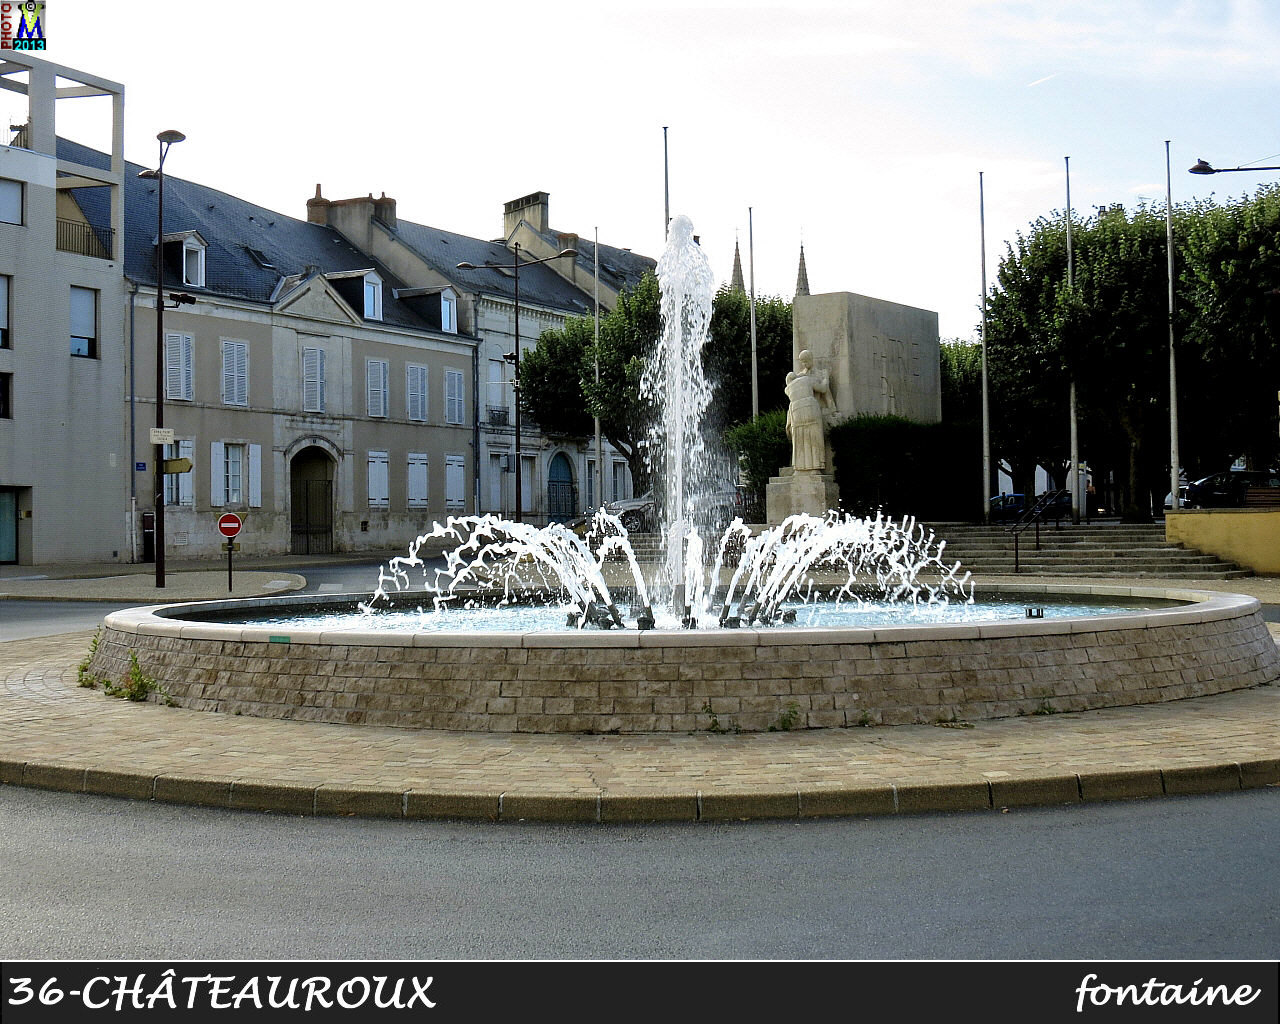 36CHATEAUROUX_fontaine_102.jpg